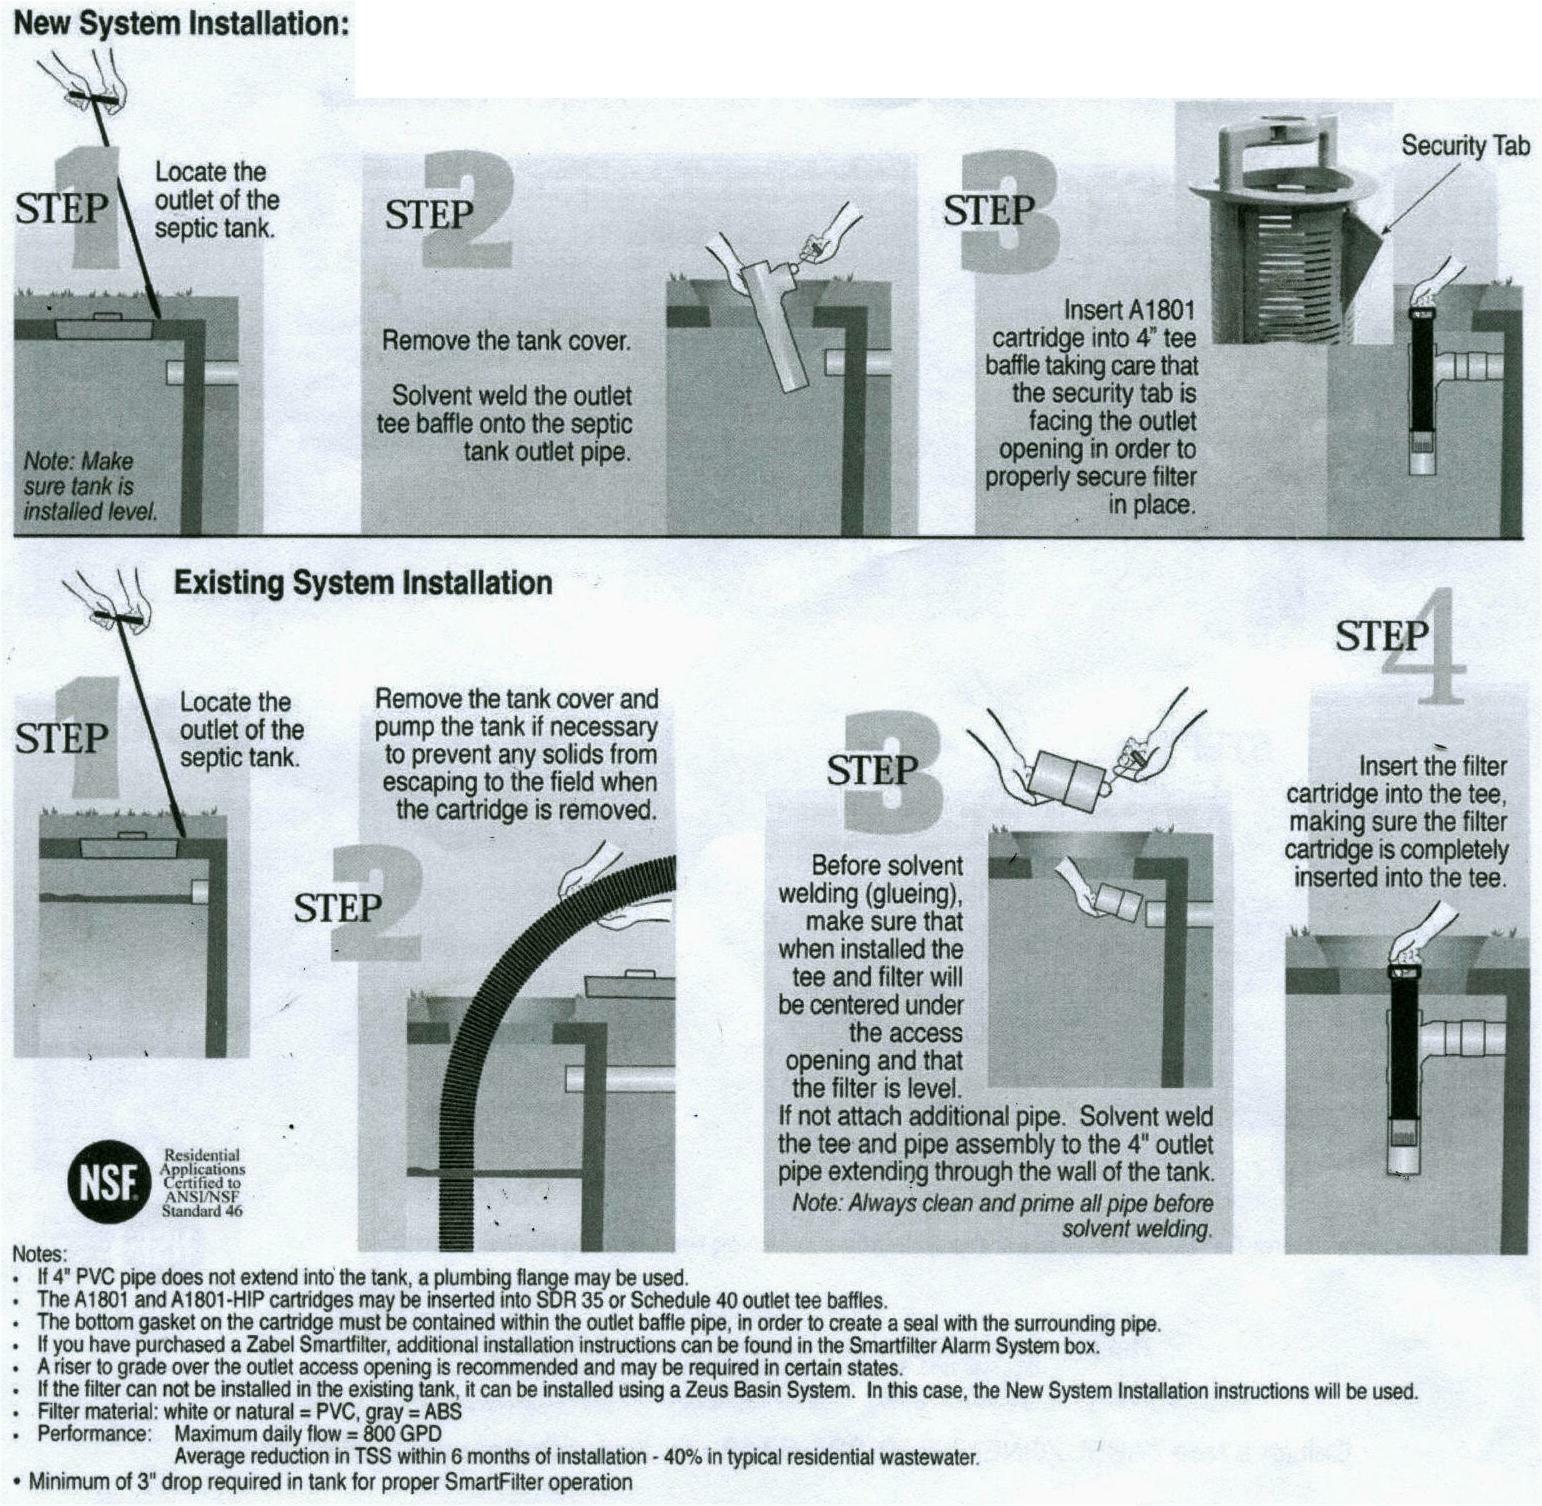 Installation instructions for life-time service, non-electric septic tank settling basin filter in outlet side of tank   